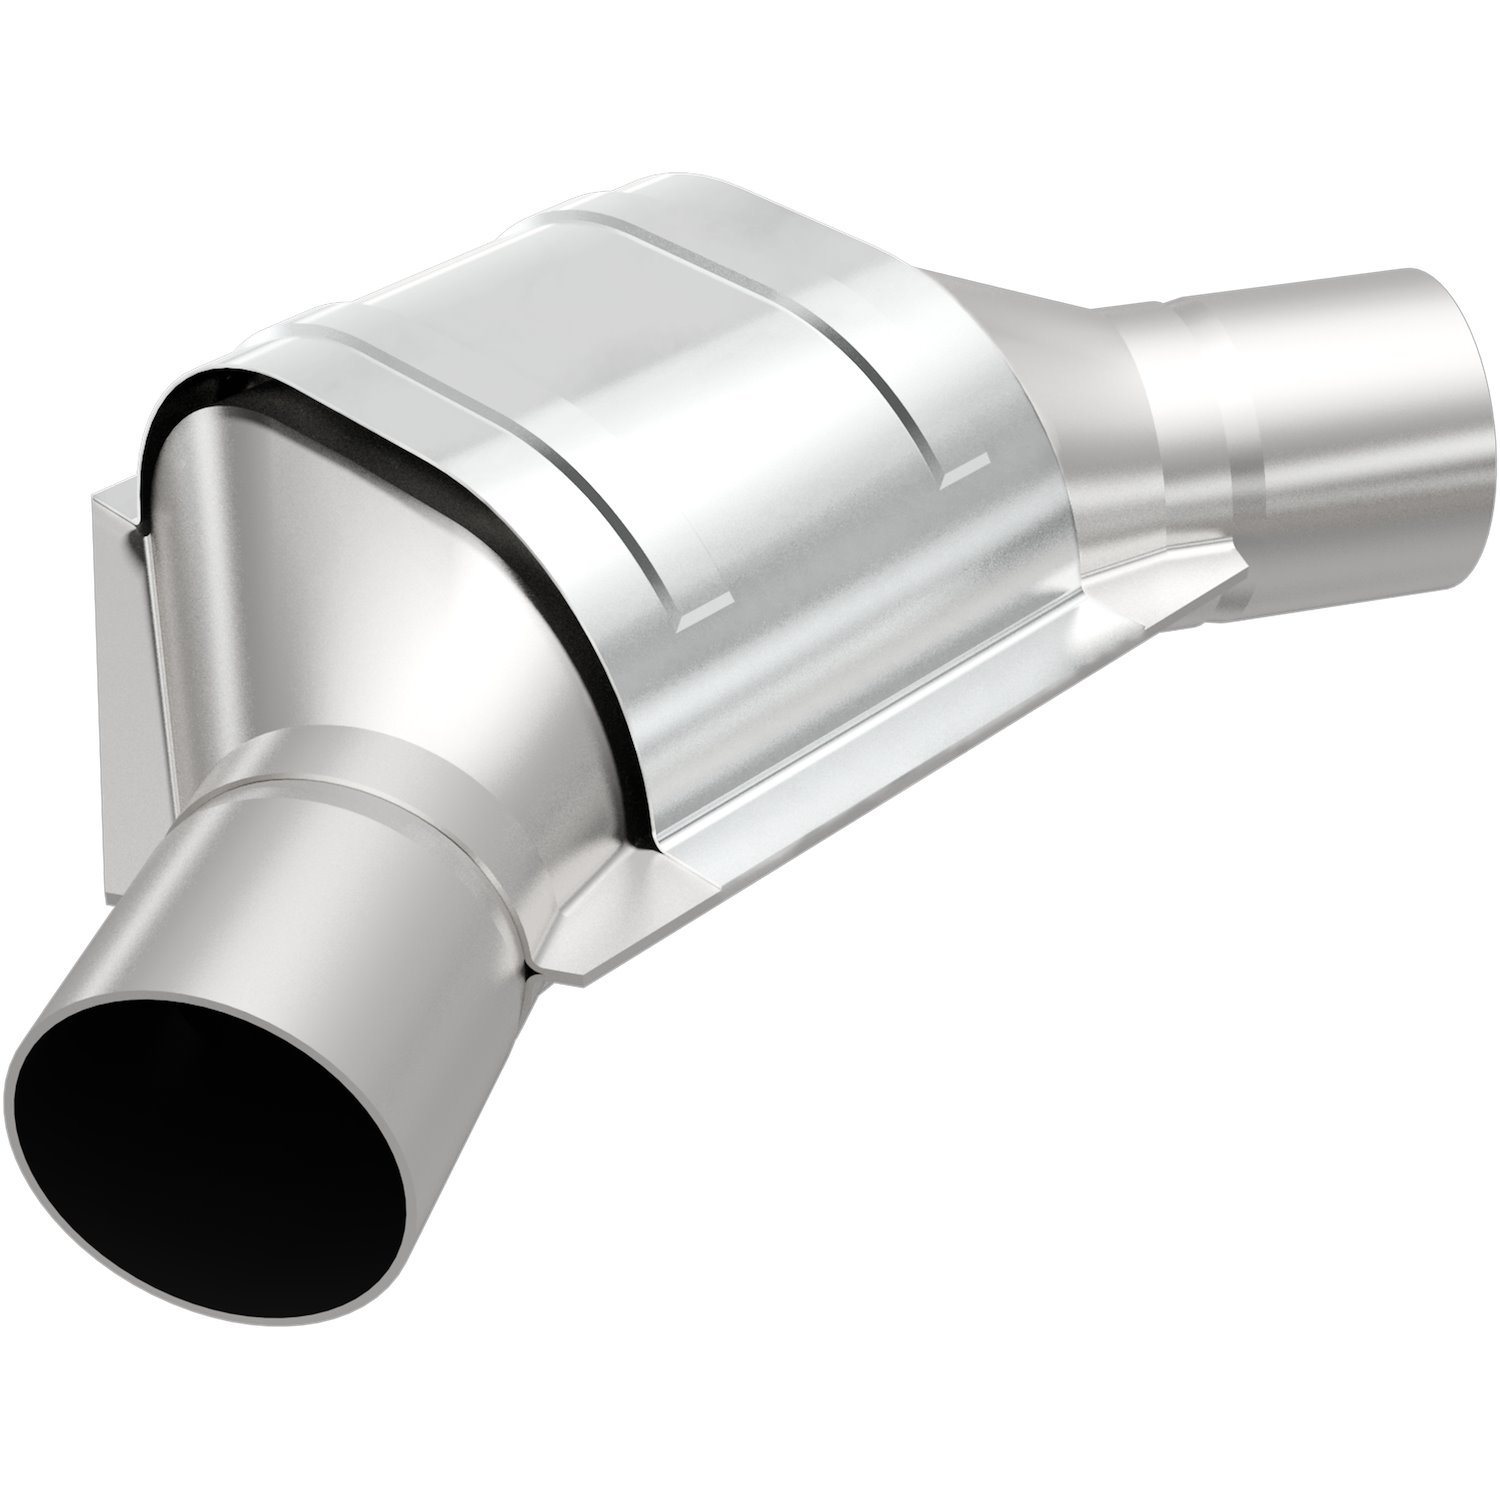 OBD-II 49-State Universal Catalytic Converter Body Shape: Angled Oval, Offset/Offset